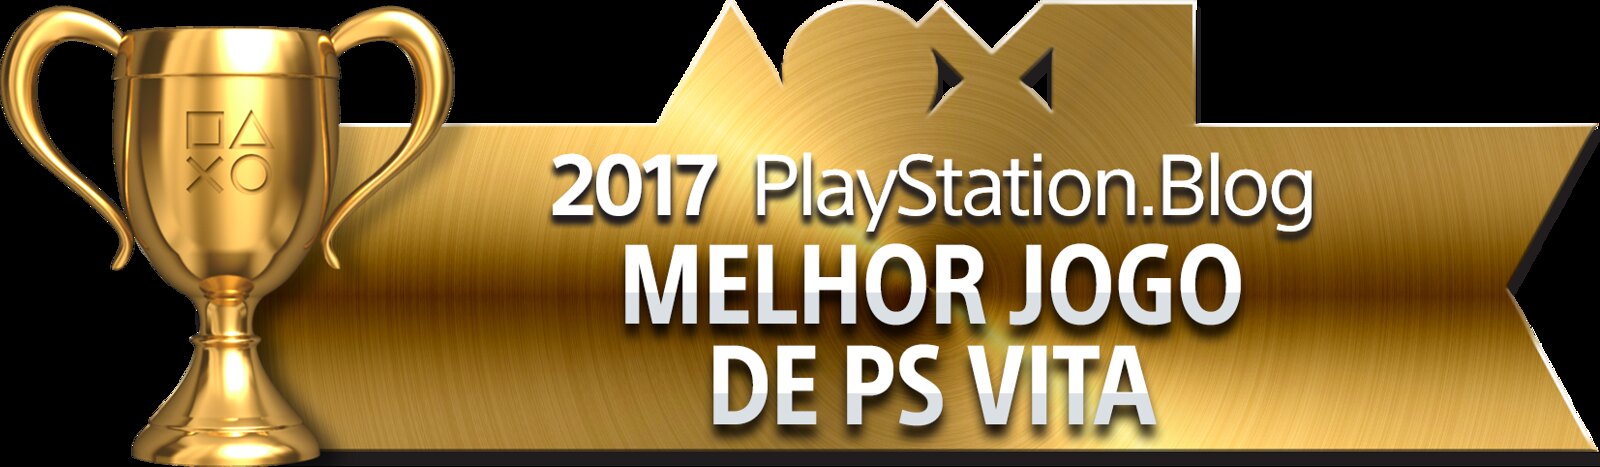 PlayStation Blog Game of the Year 2017 - Best PS Vita Game (Gold)